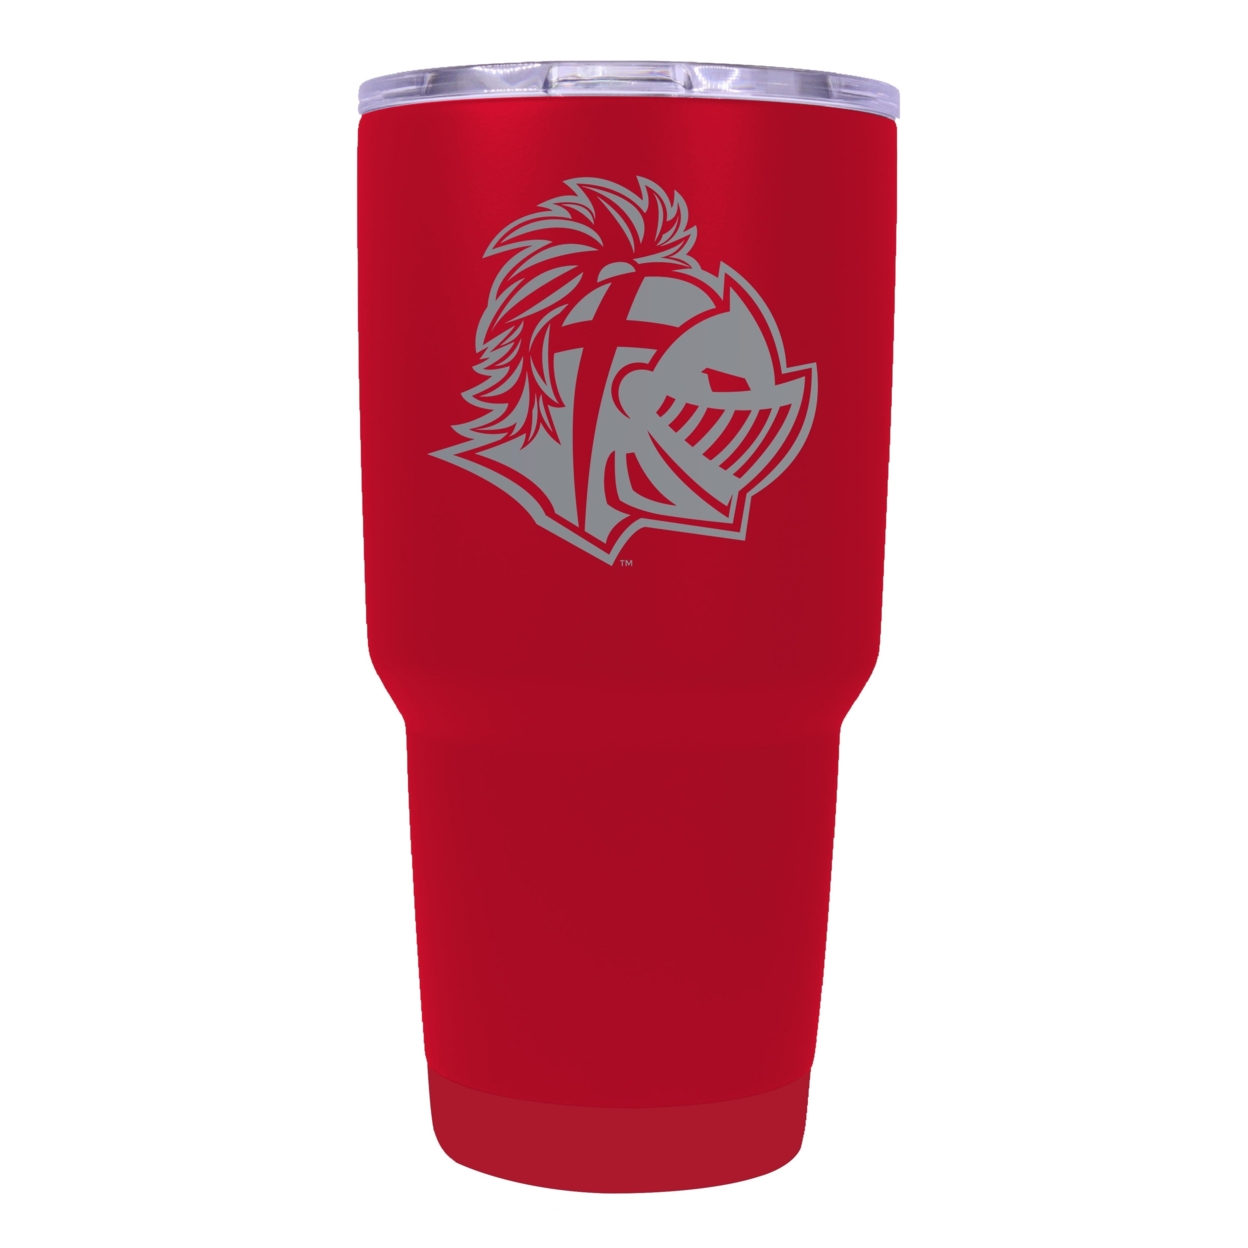 Southern Wesleyan University 24 Oz Laser Engraved Stainless Steel Insulated Tumbler - Choose Your Color. - Navy